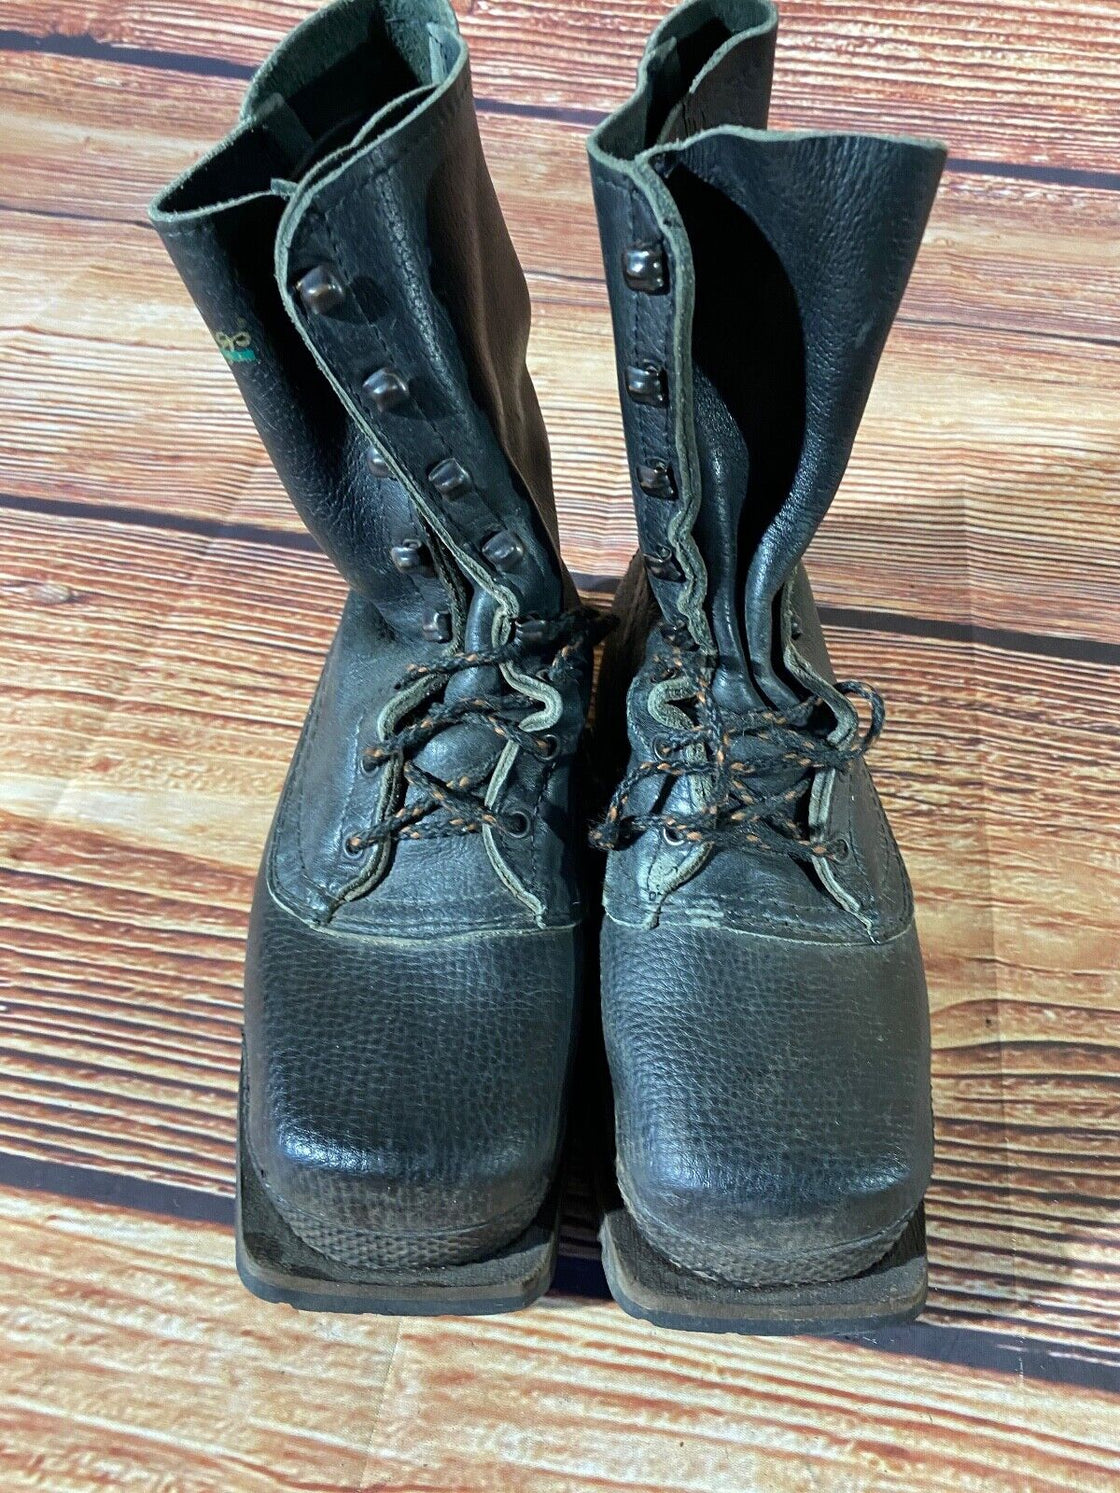 LUNDHAGS Vintage Cross Country Ski Boots Kandahar Old Cable Bindings EU41 US7.5